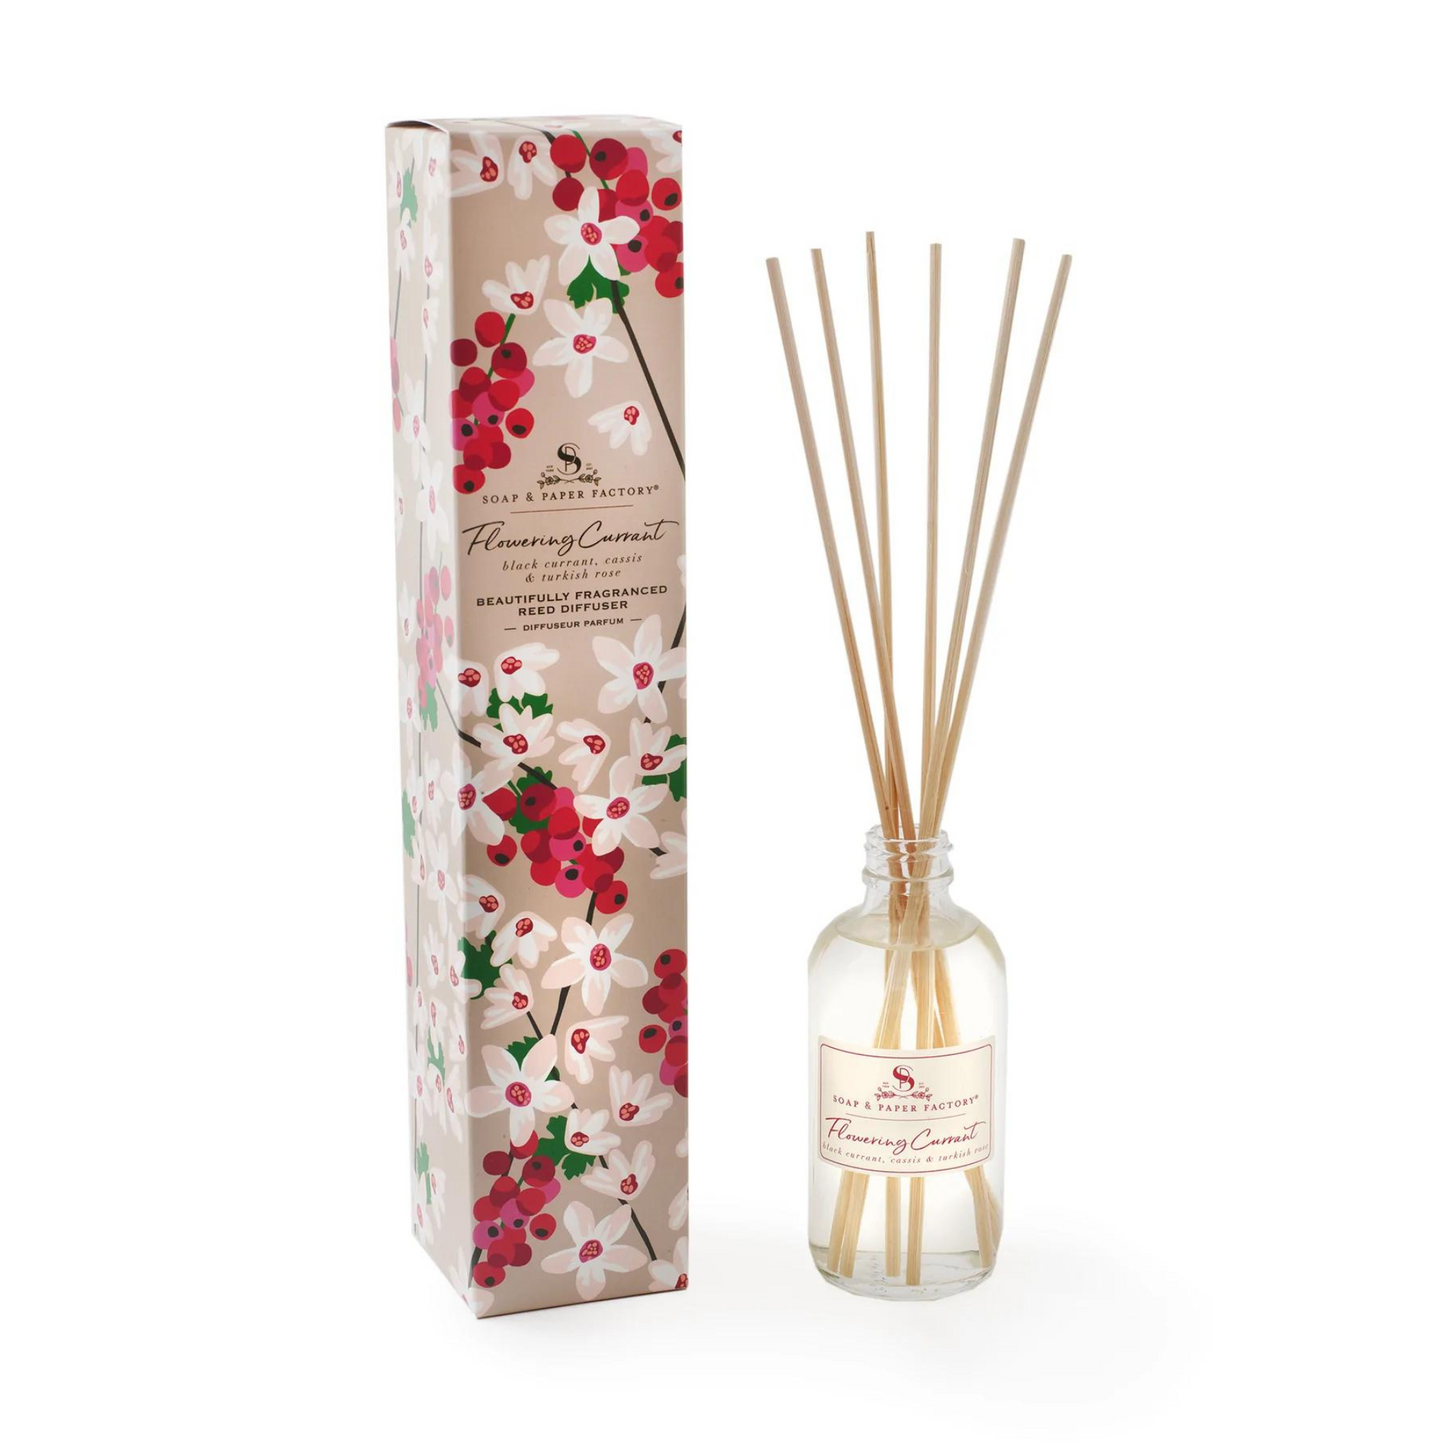 Primary Image of Soap & Paper Factory Flowering Currant Reed Diffuser (3.65 fl oz)